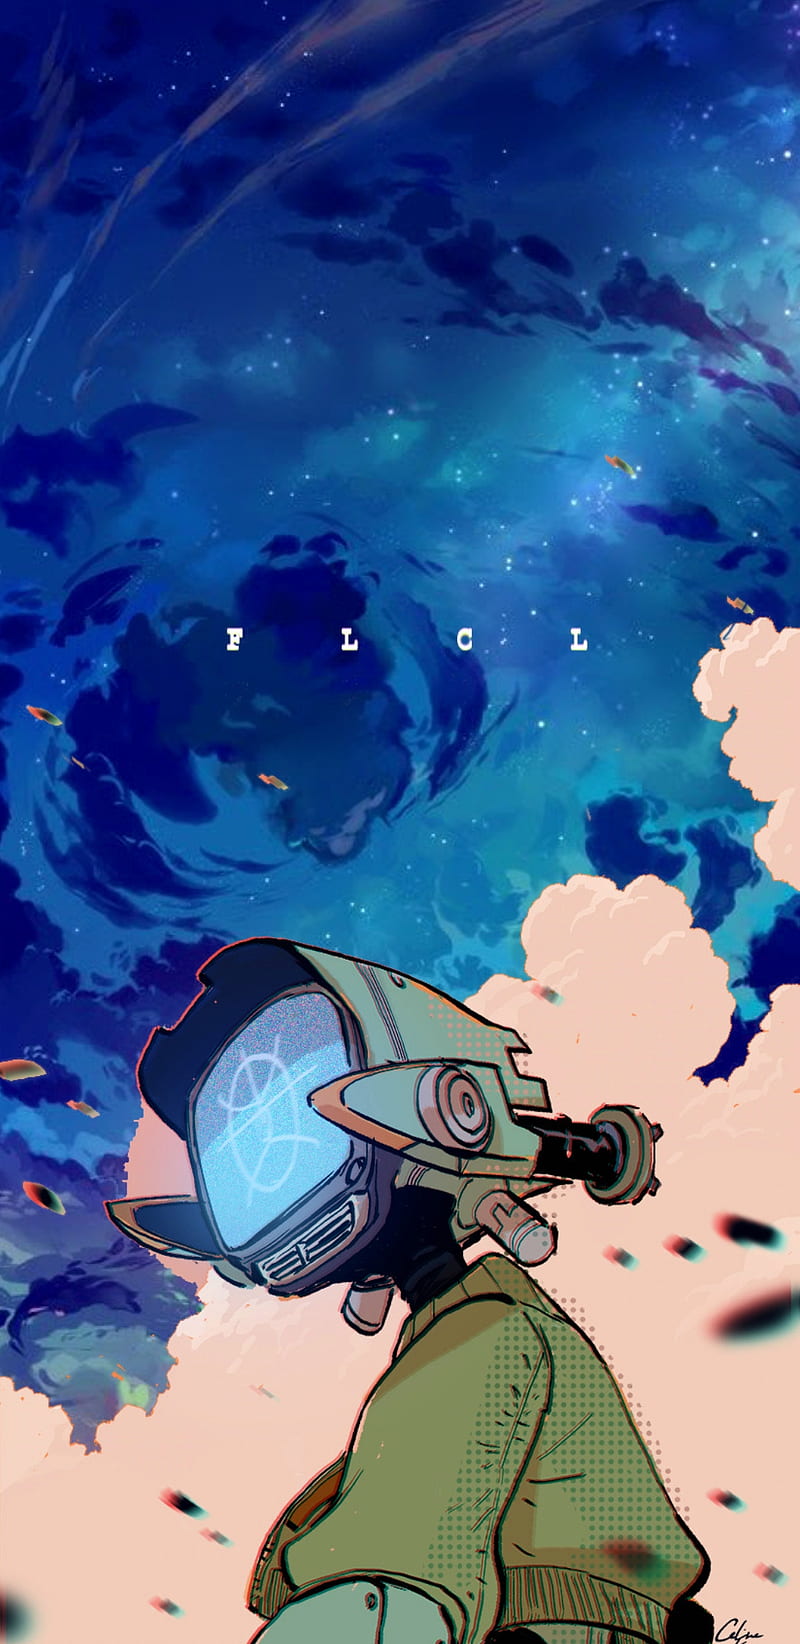 13 Flcl Wallpapers for iPhone and Android by Ashlee Goodwin